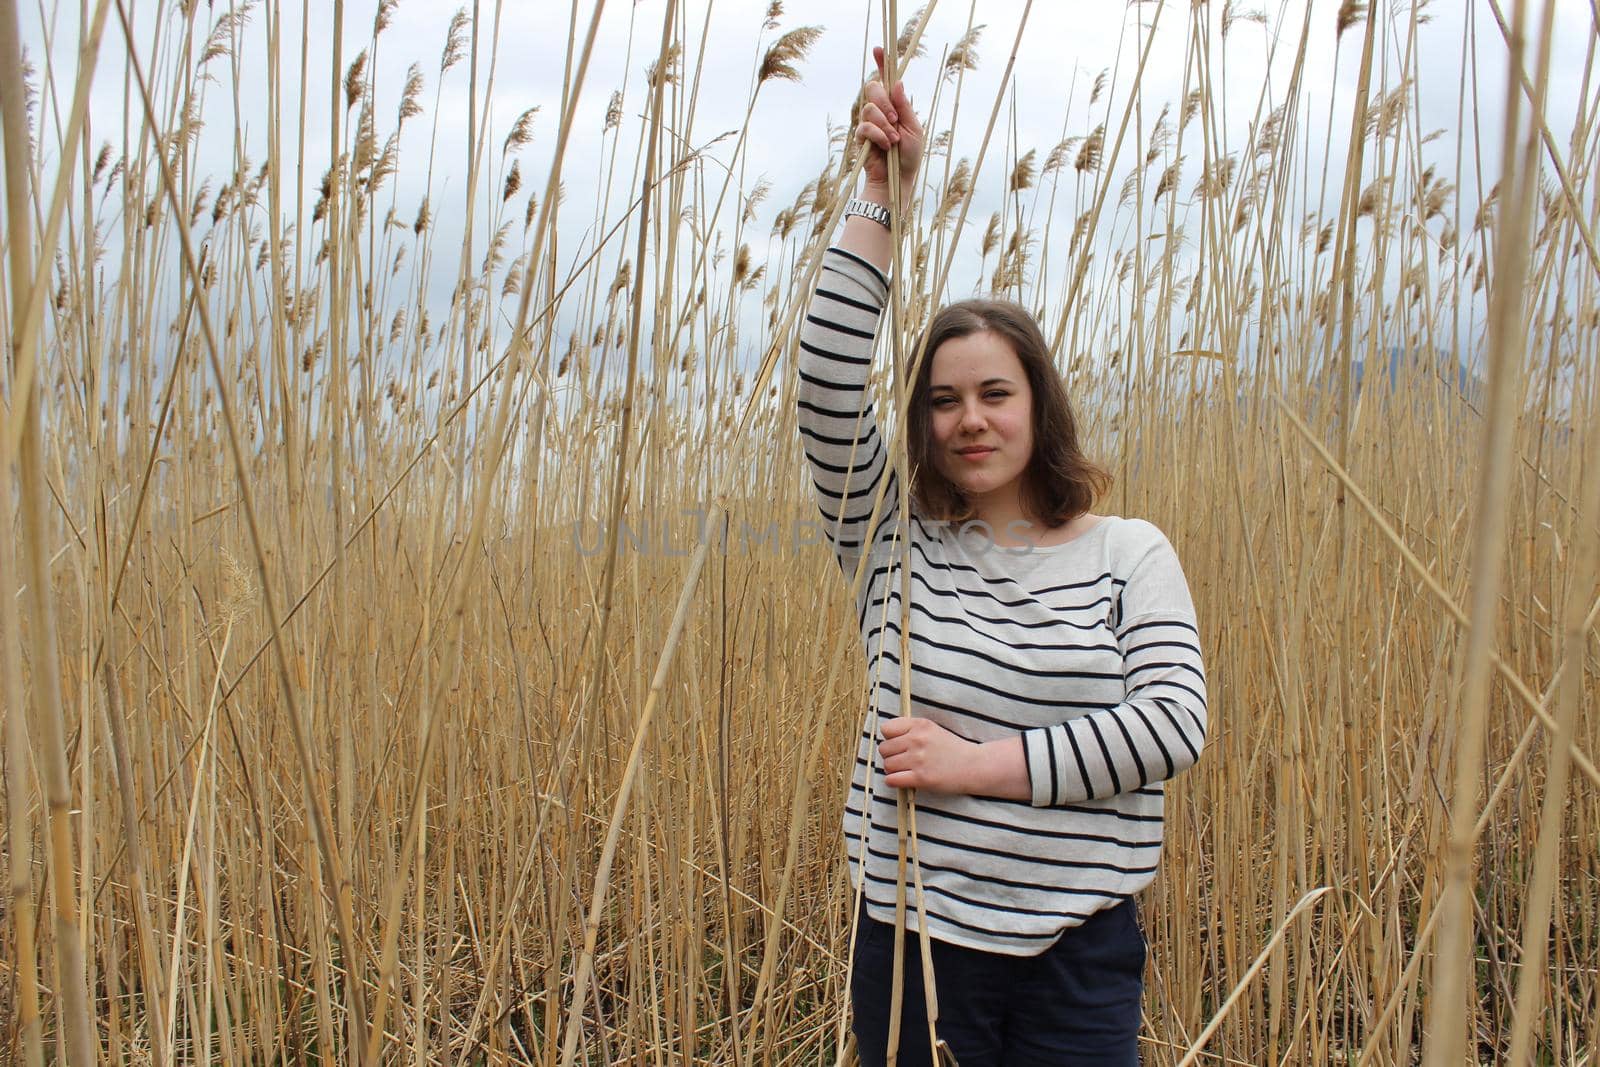 A young girl in an outdoor field against a backdrop of wheat or tall grass. by Olga26